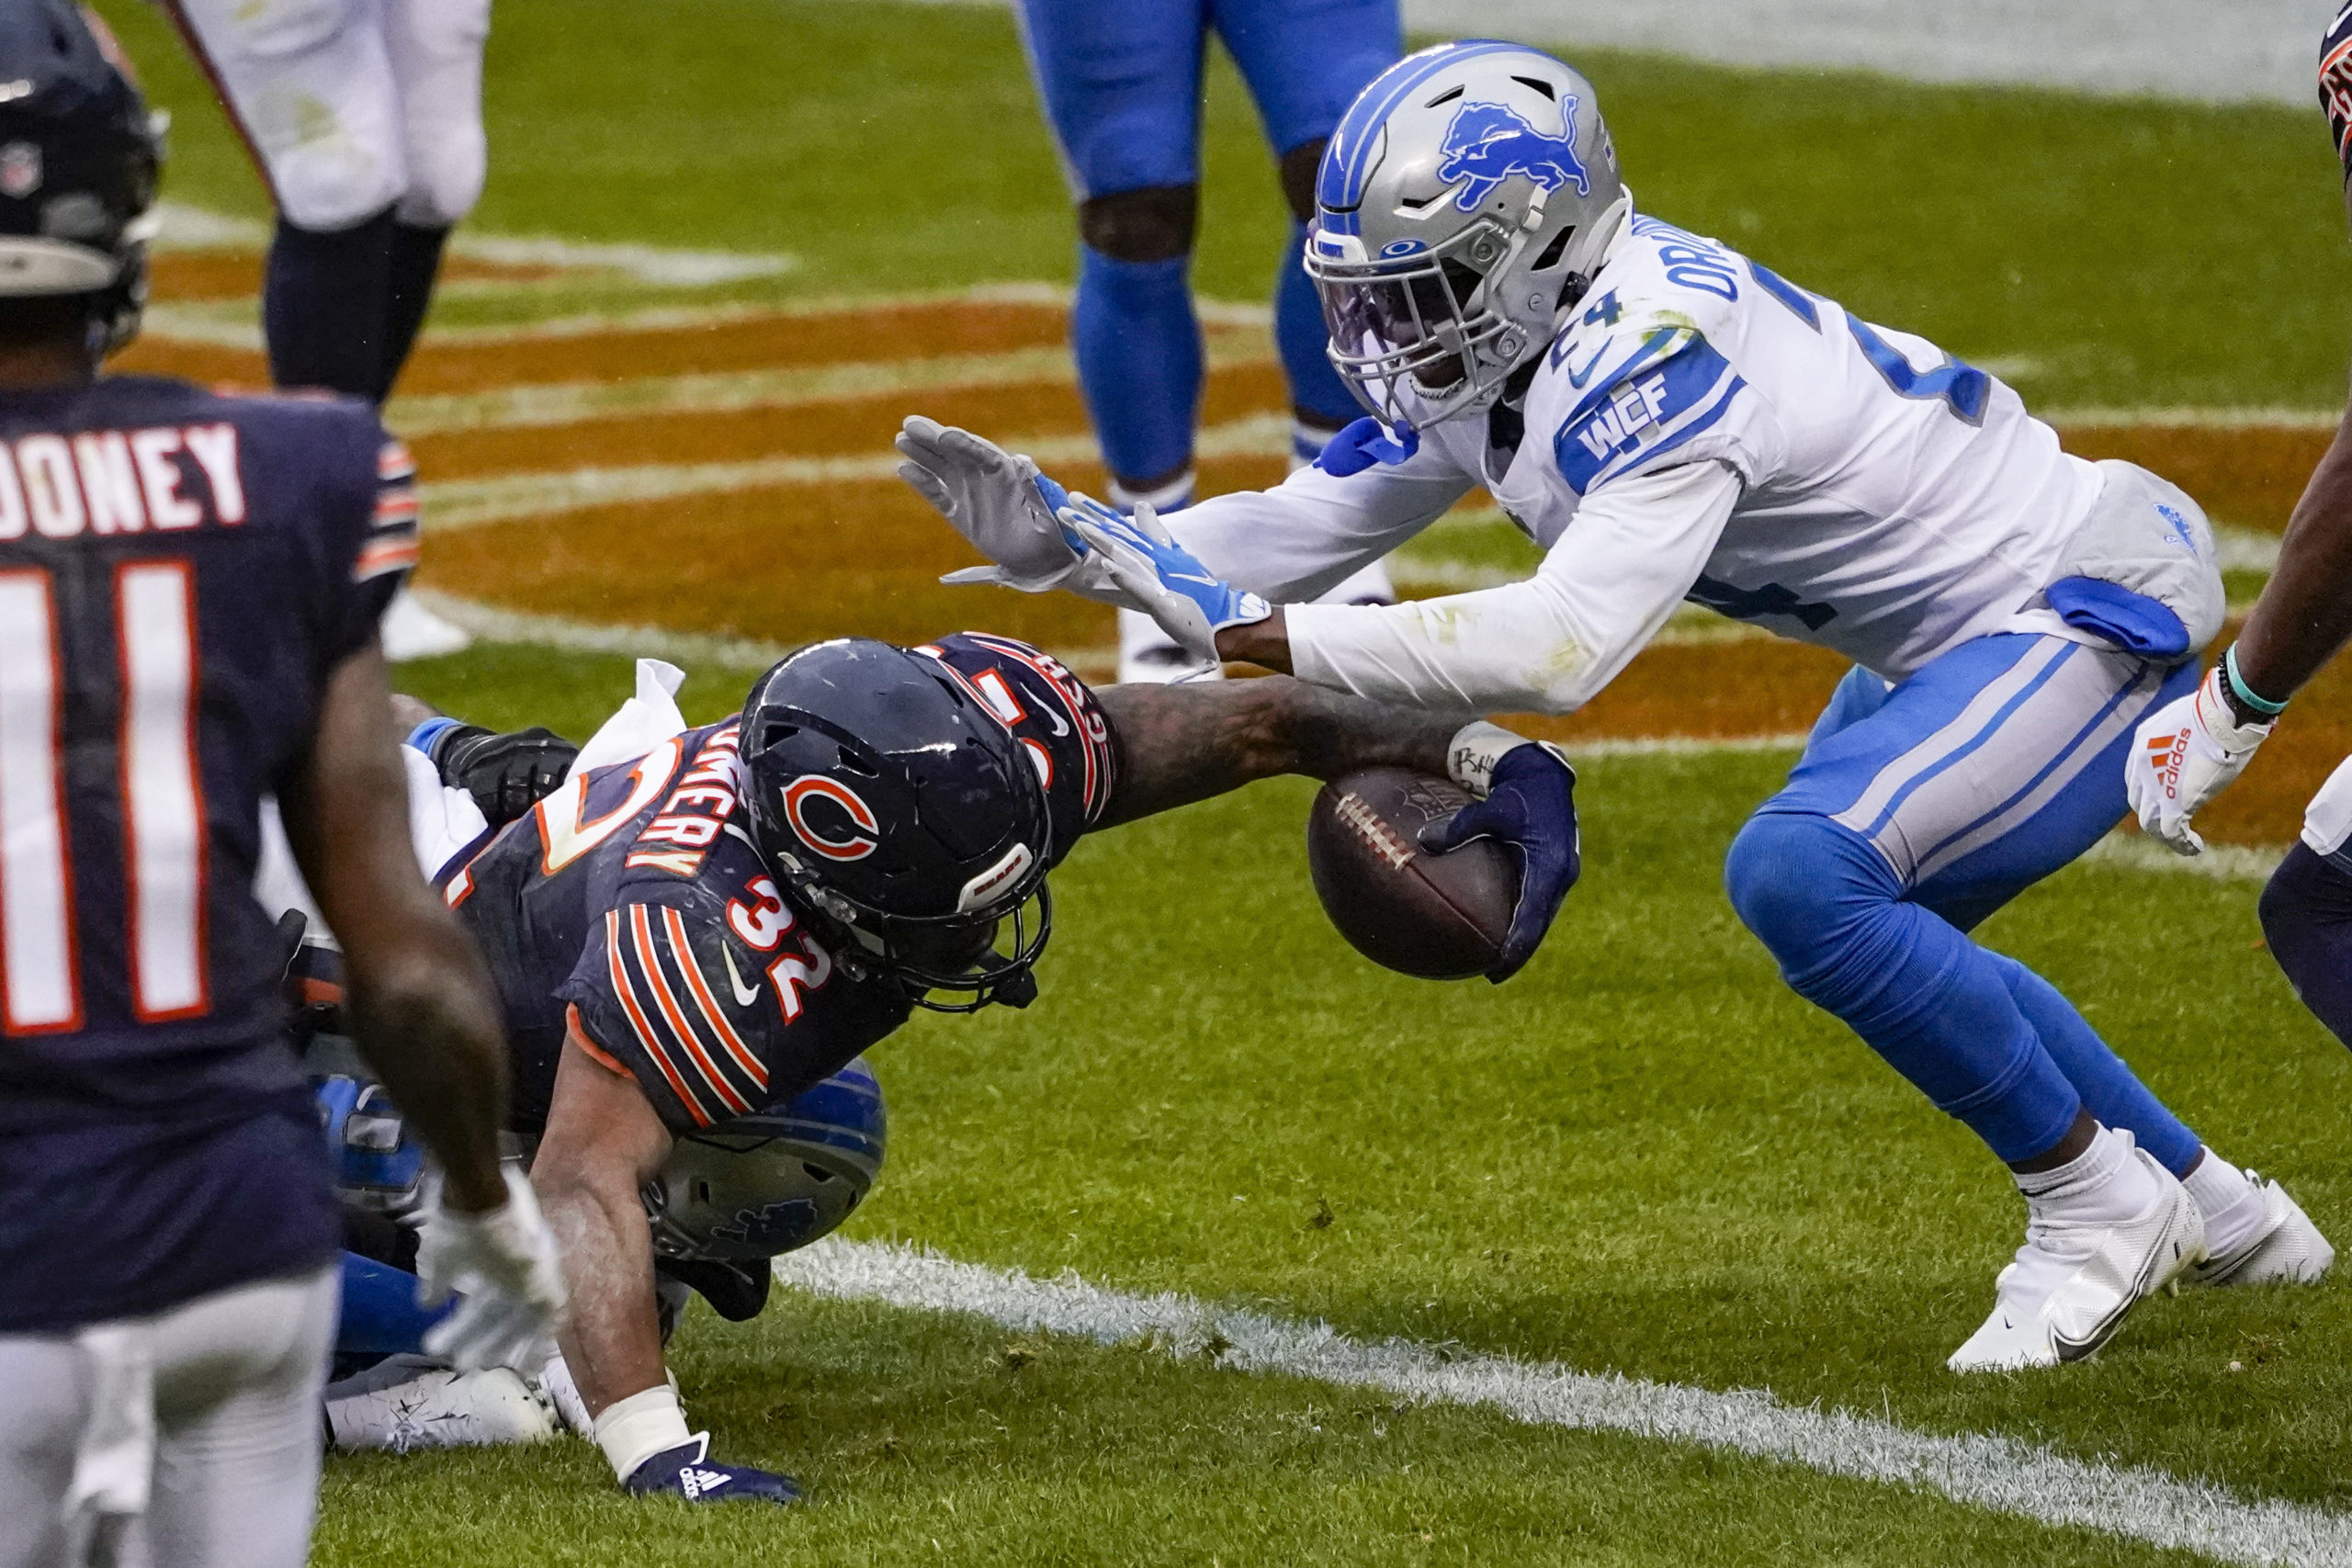 Bears Hosting the Lions – Free NFL ATS pick on the Total